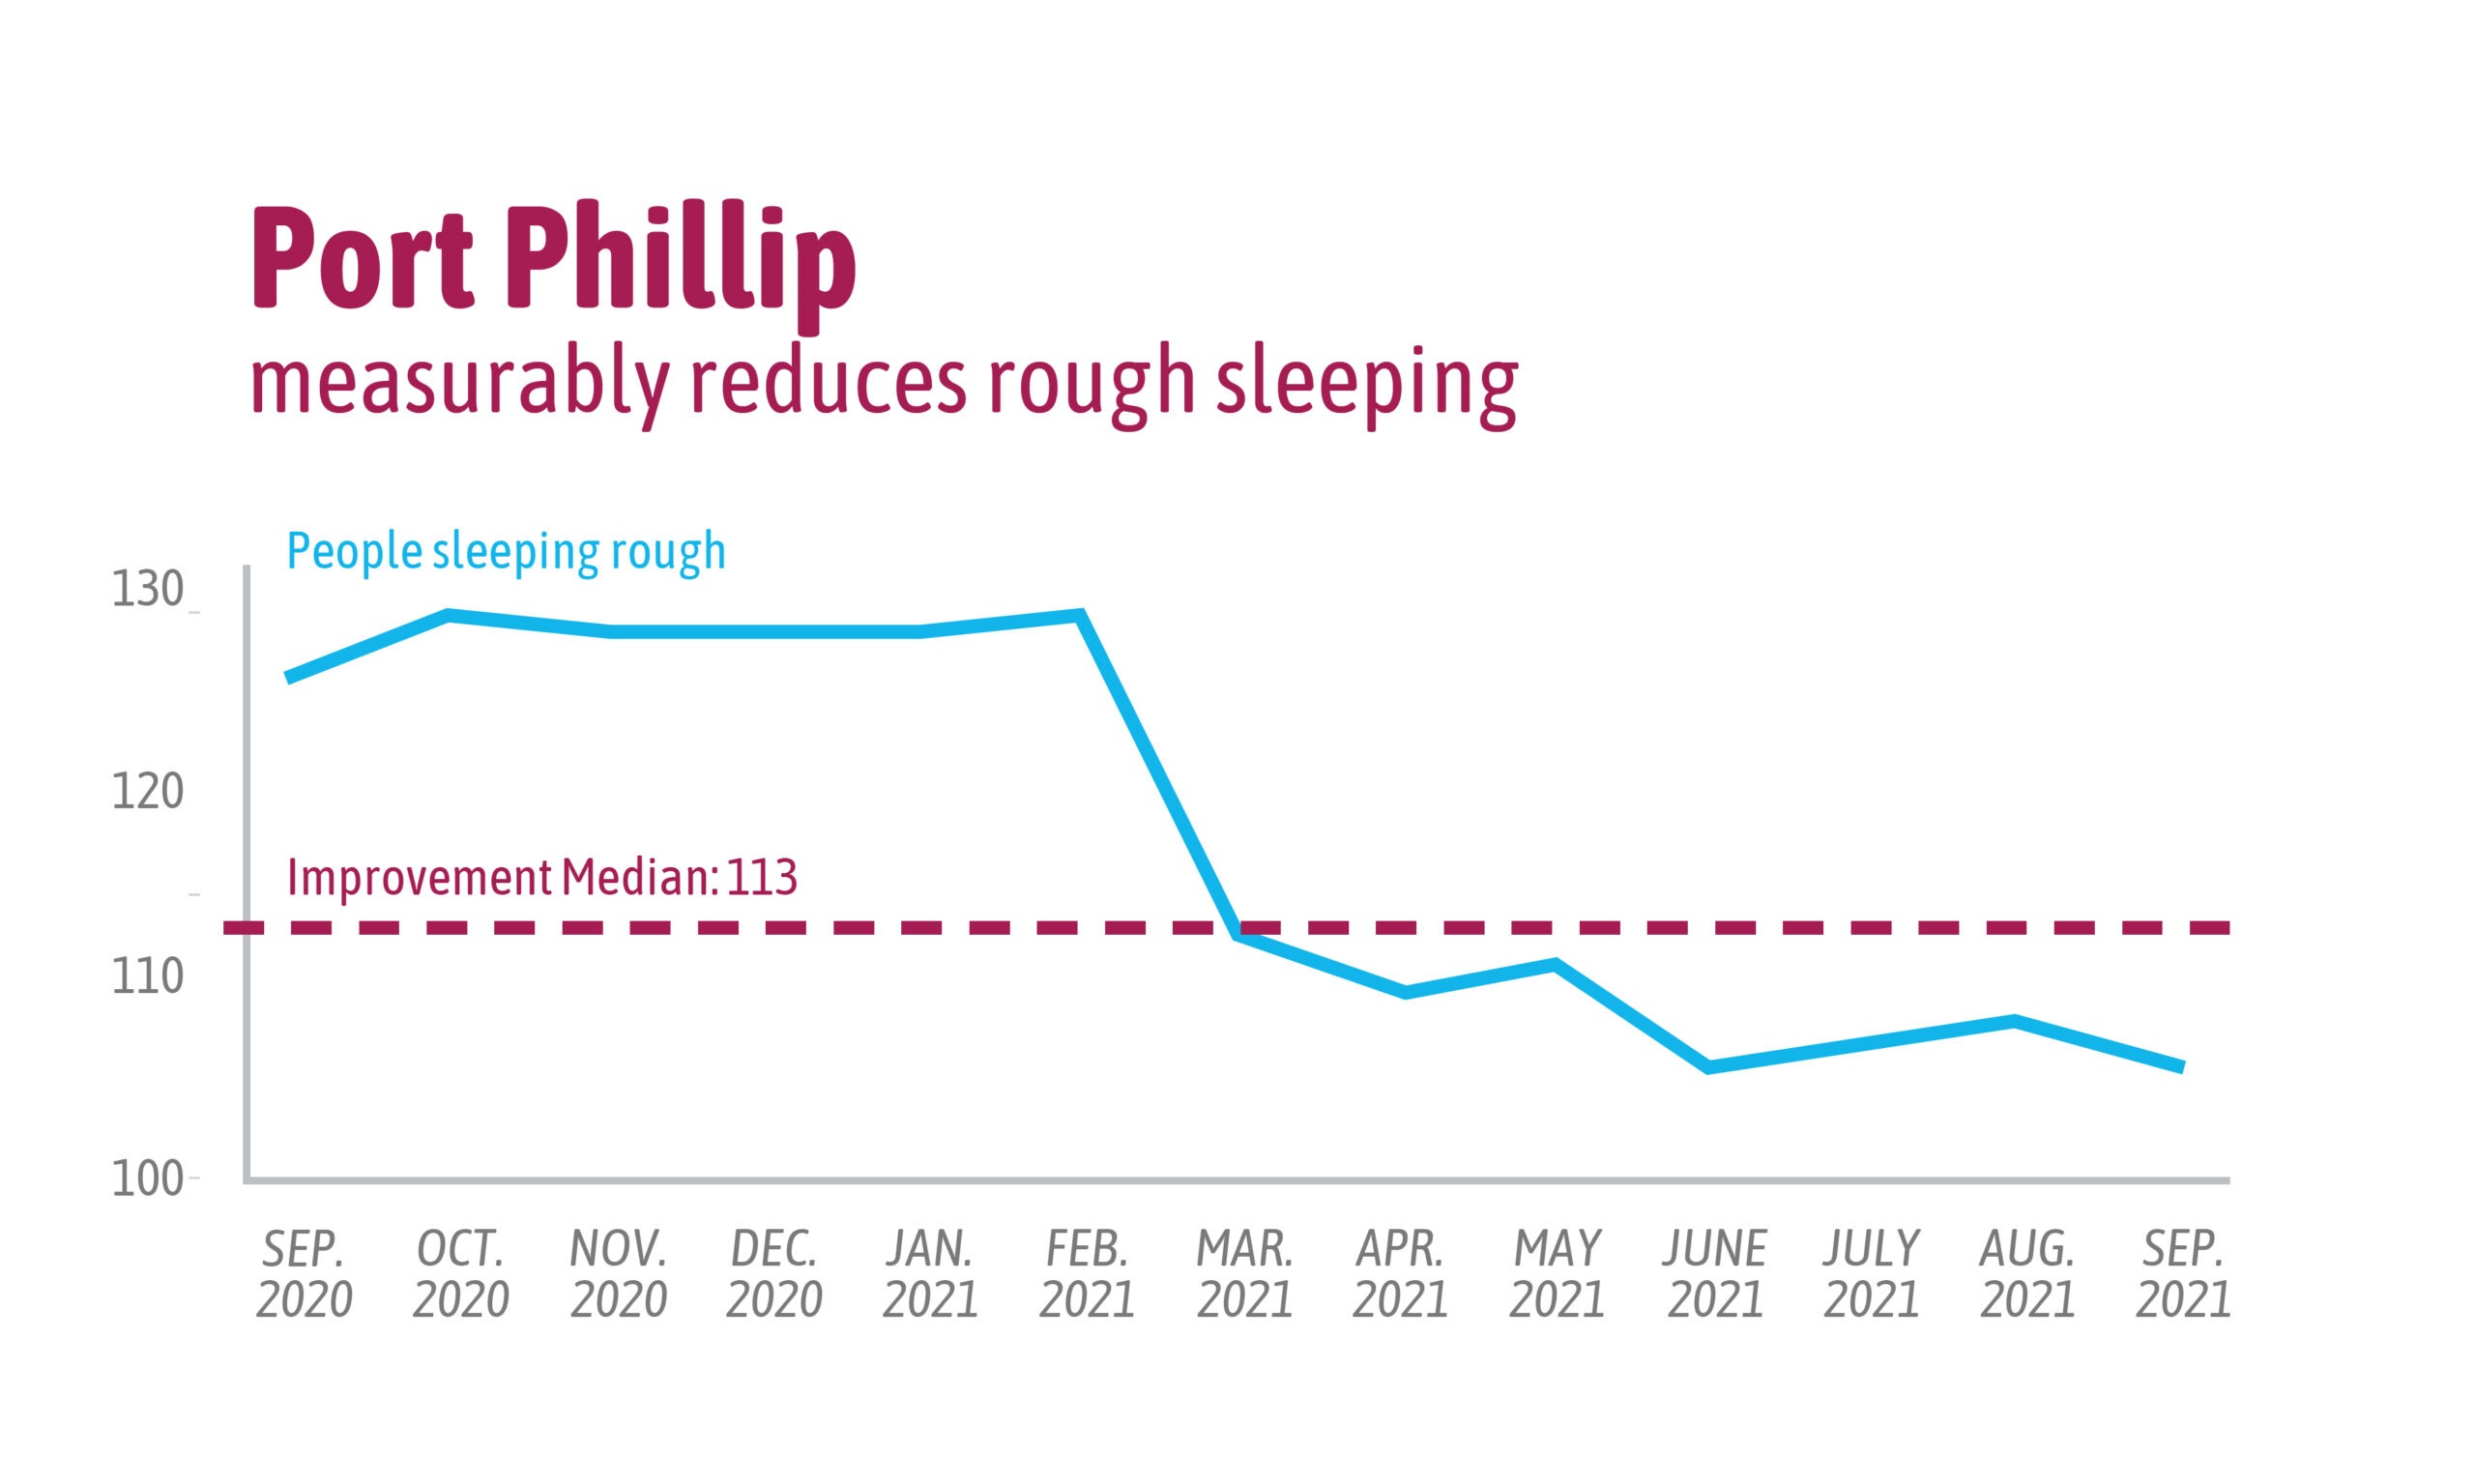 Run chart showing how Port Phillip measurably reduced rough sleeping in 2021